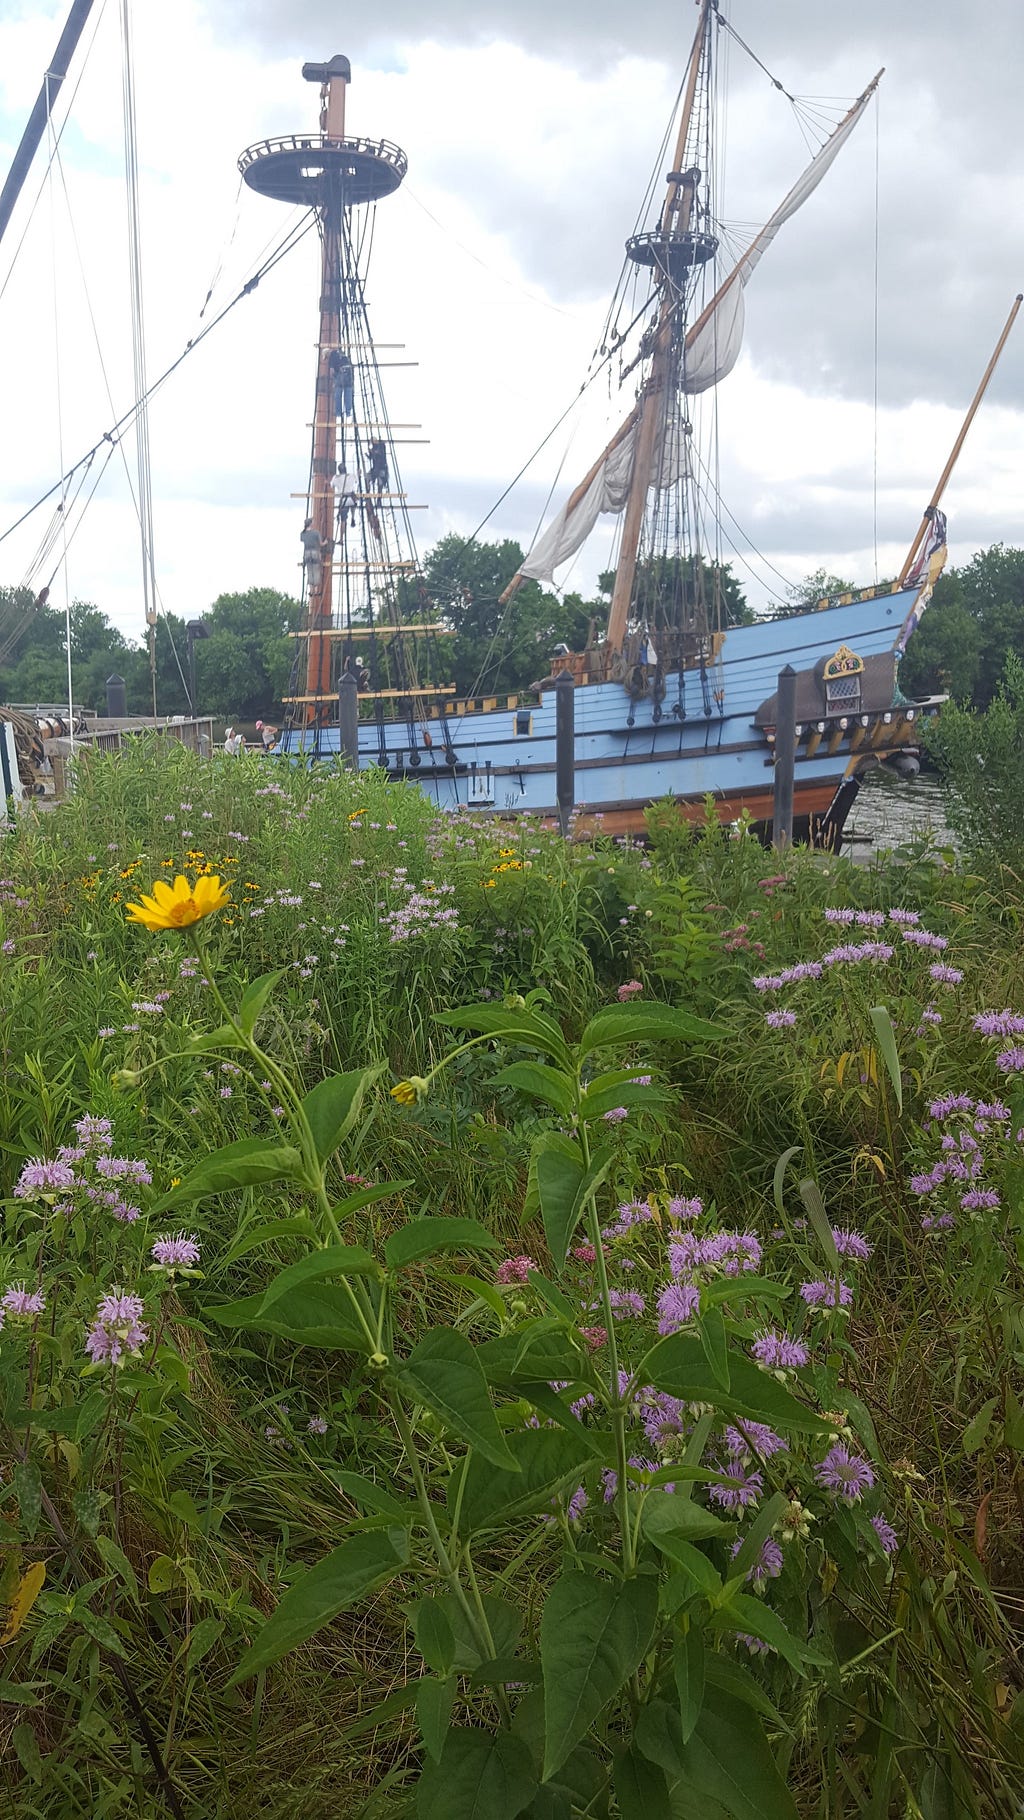 Wildflowers growing on the banks of a river, with a tall ship in the background.